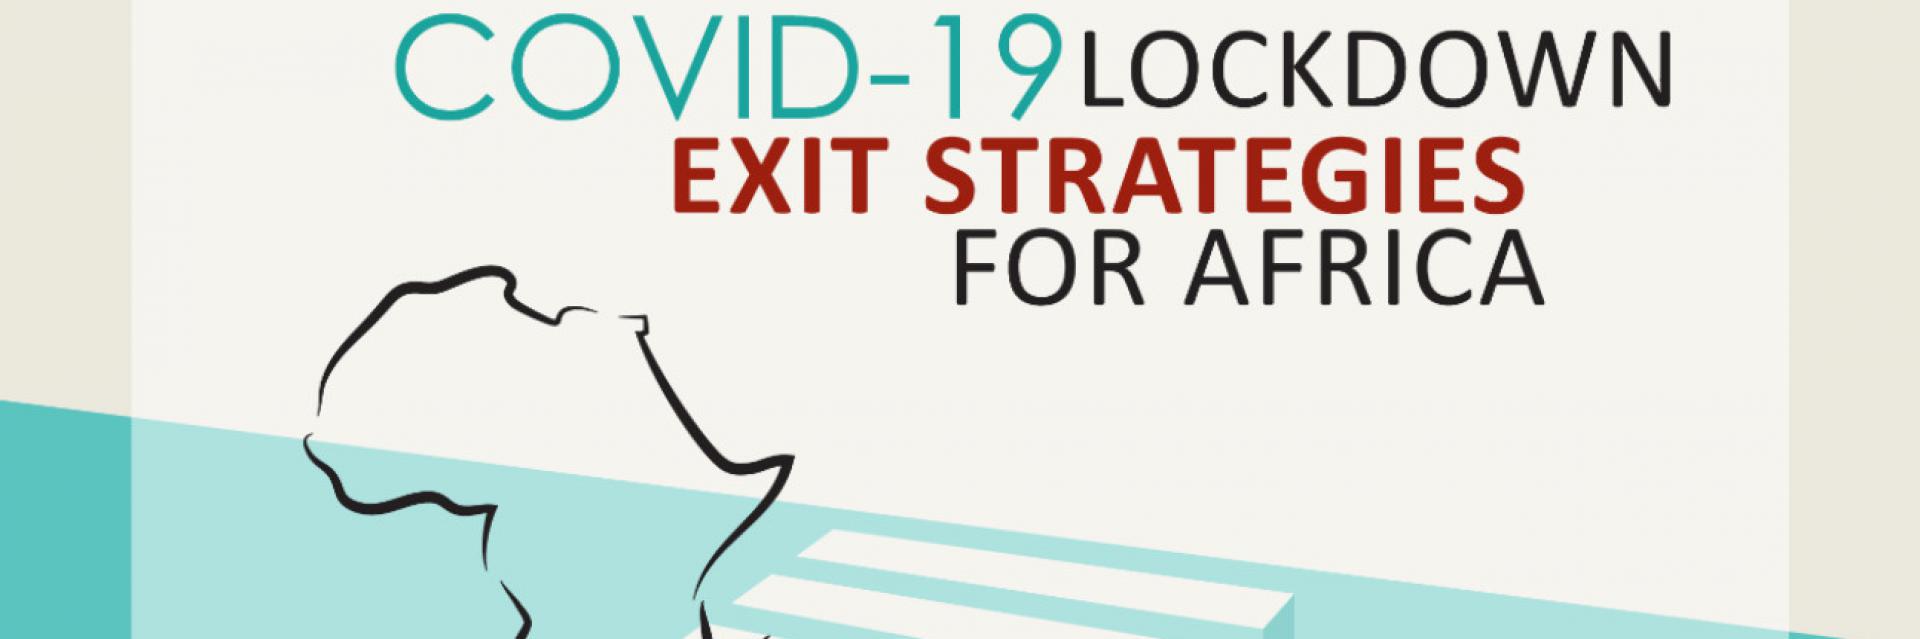 ECA proposes COVID-19 exit strategies to bring African economies back on track